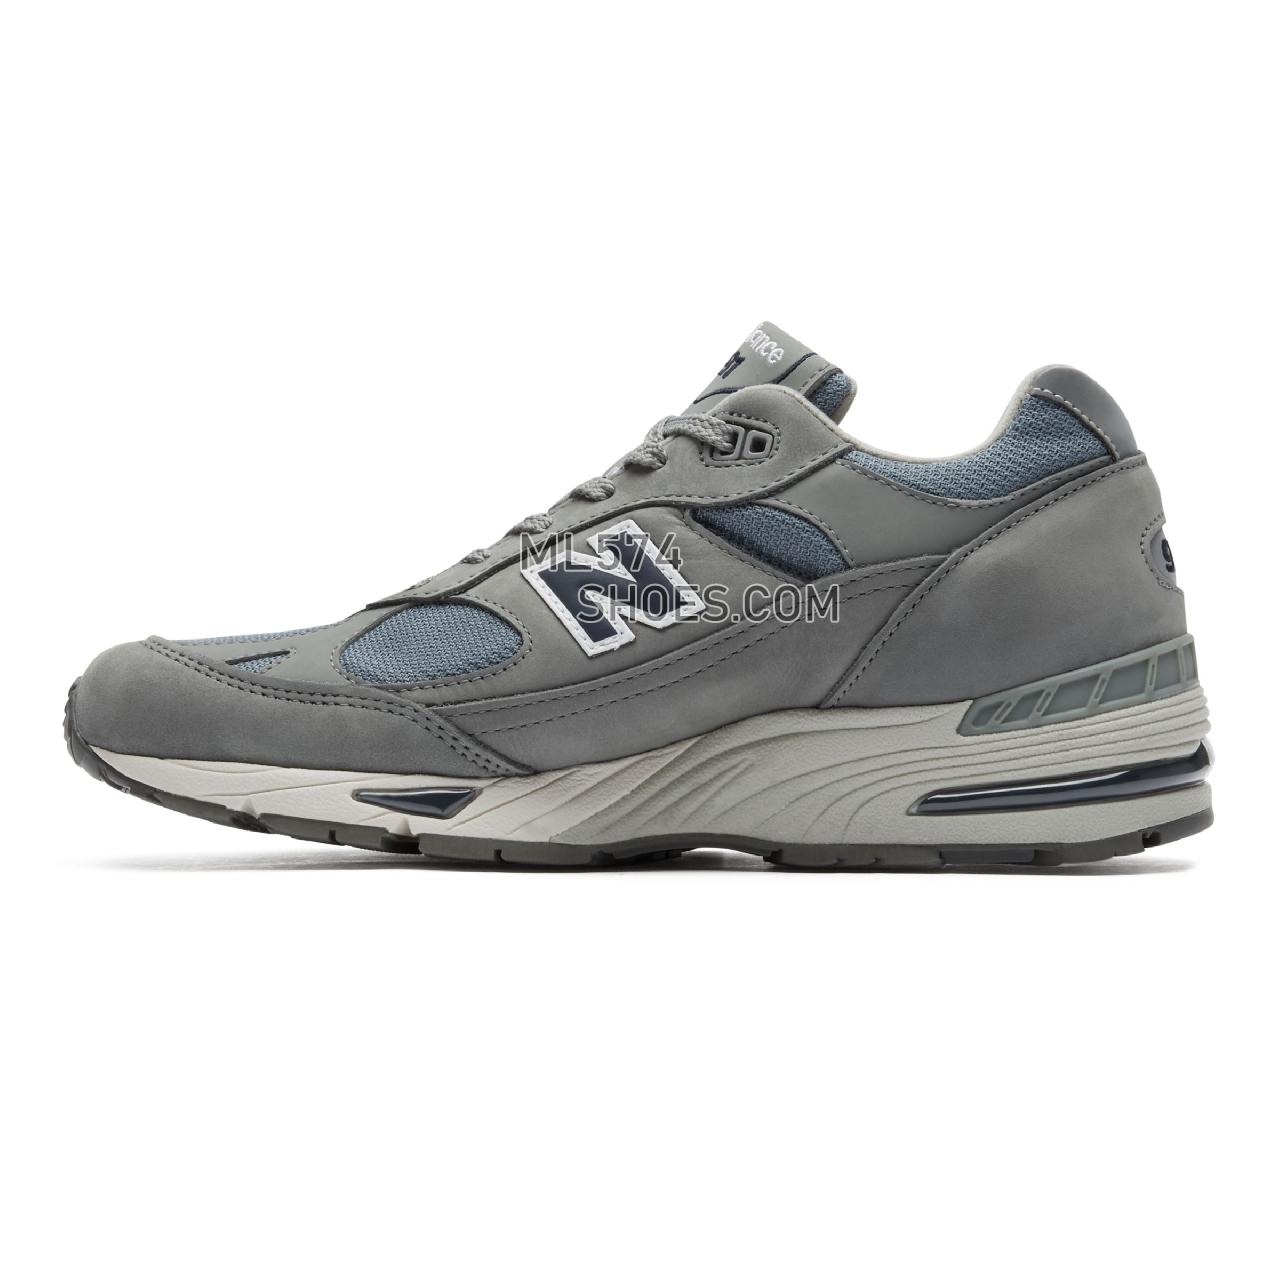 New Balance Made in UK 991 - Men's Made in UK 991 Classic - Grey with Navy - M991NGN